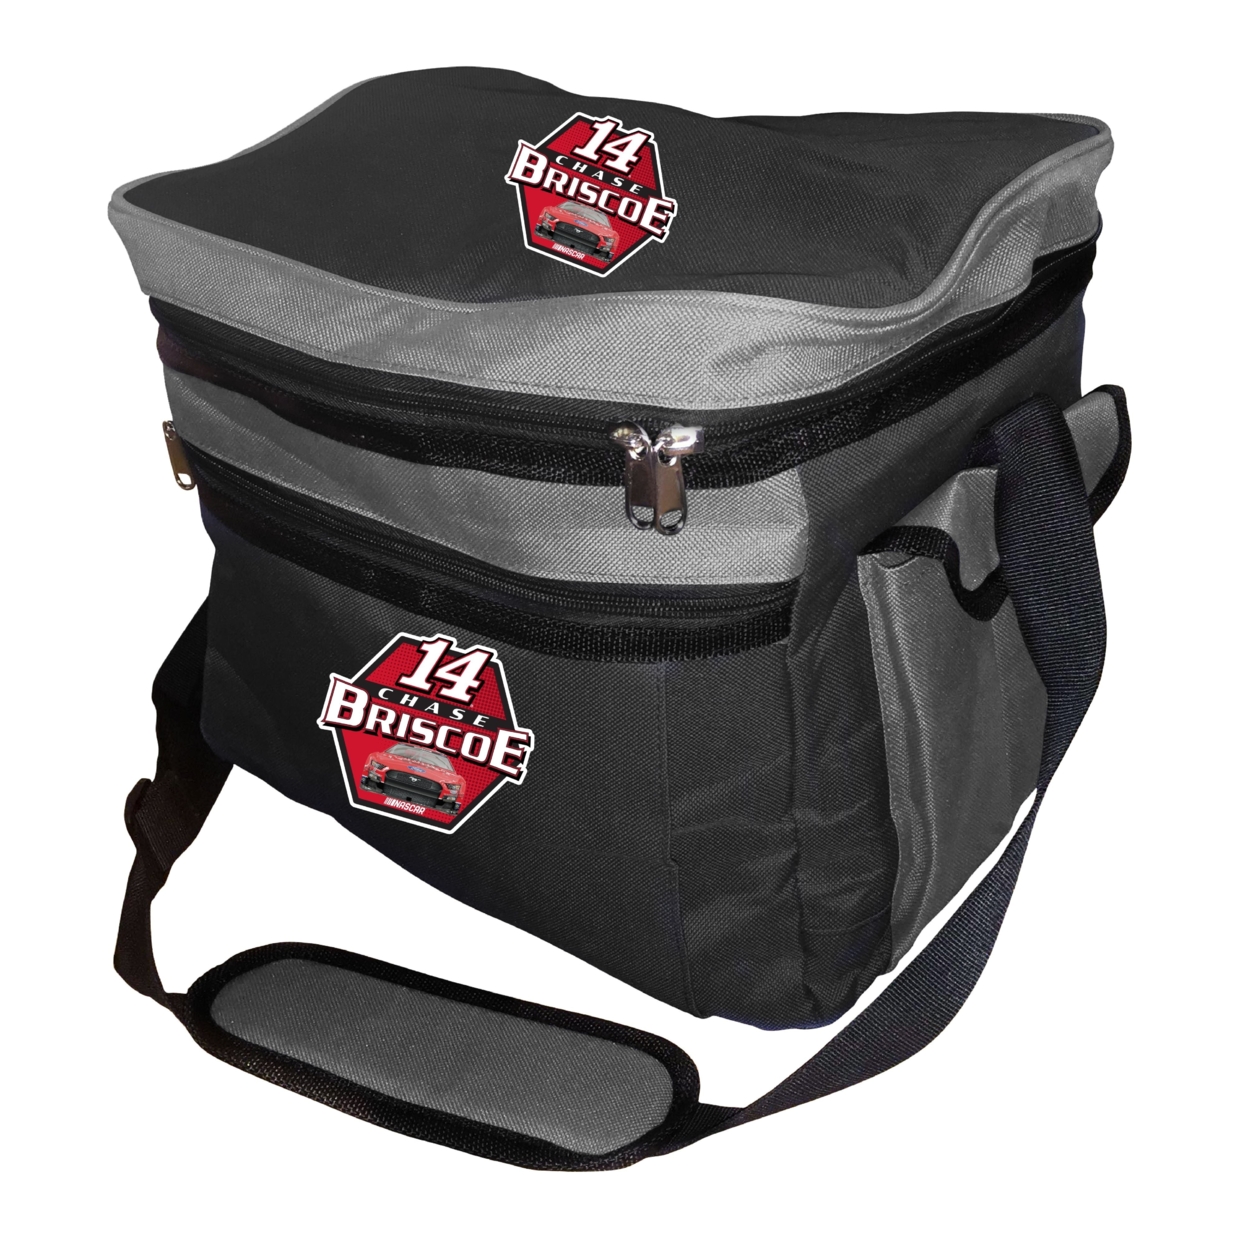 #14 Chase Briscoe Officially Licensed 24 Pack Cooler Bag